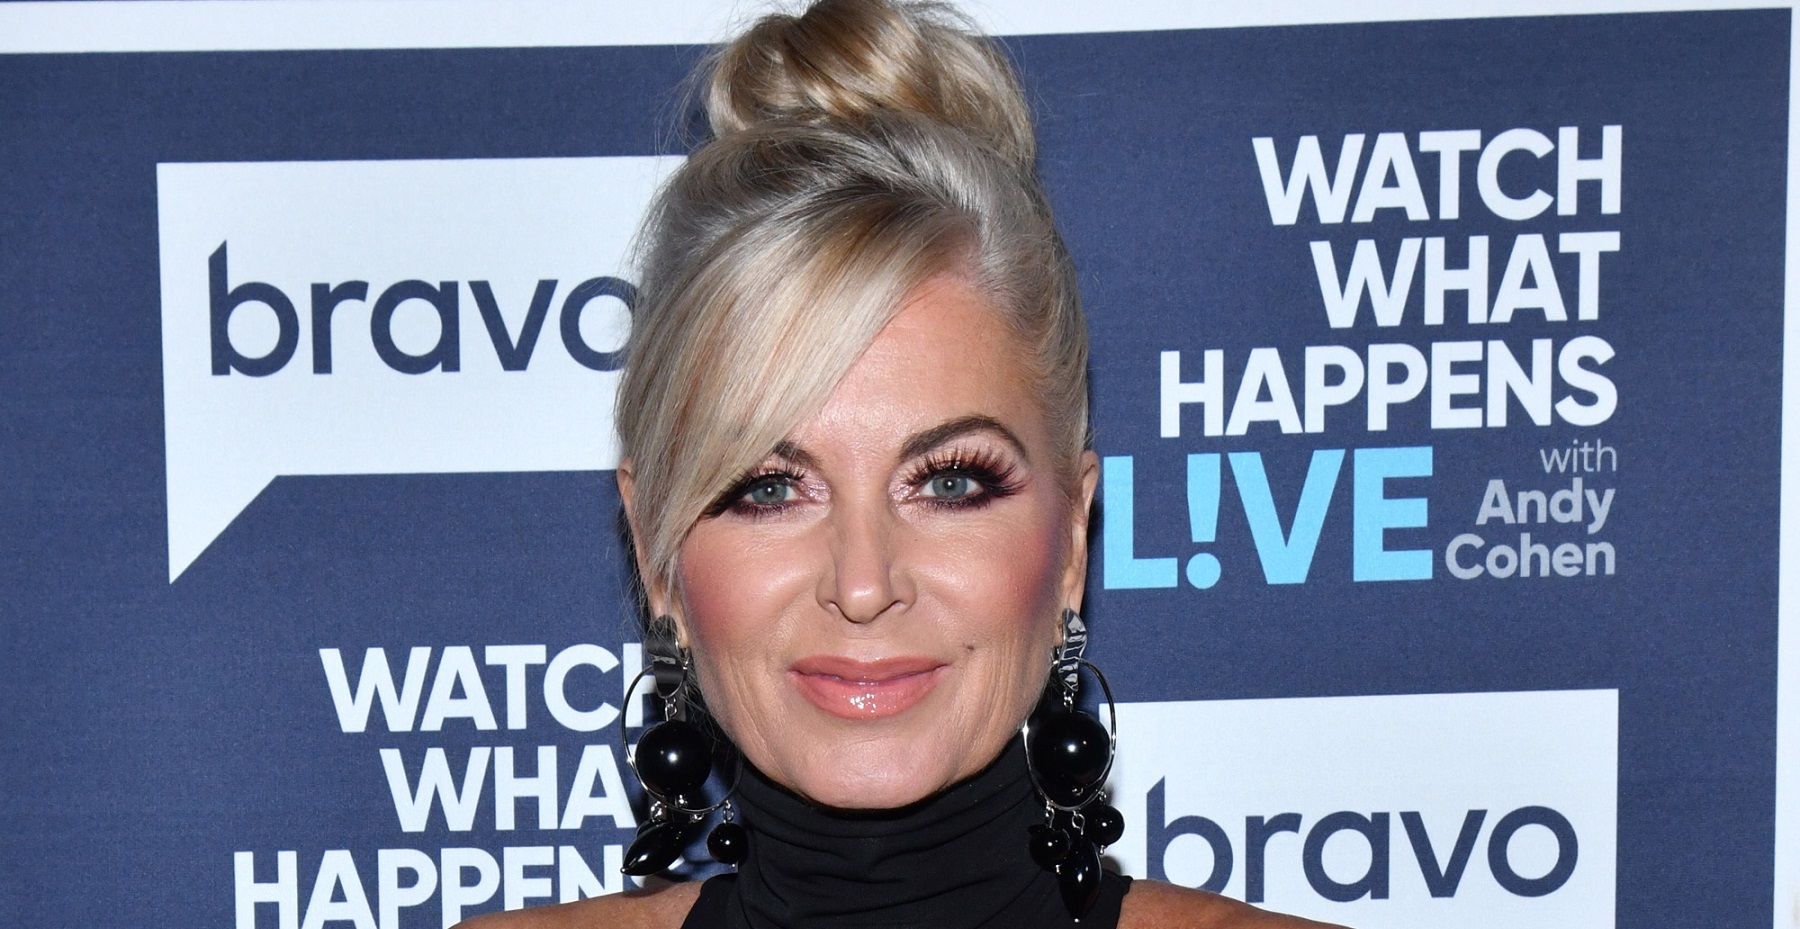 Days of Our Lives star Eileen Davidson